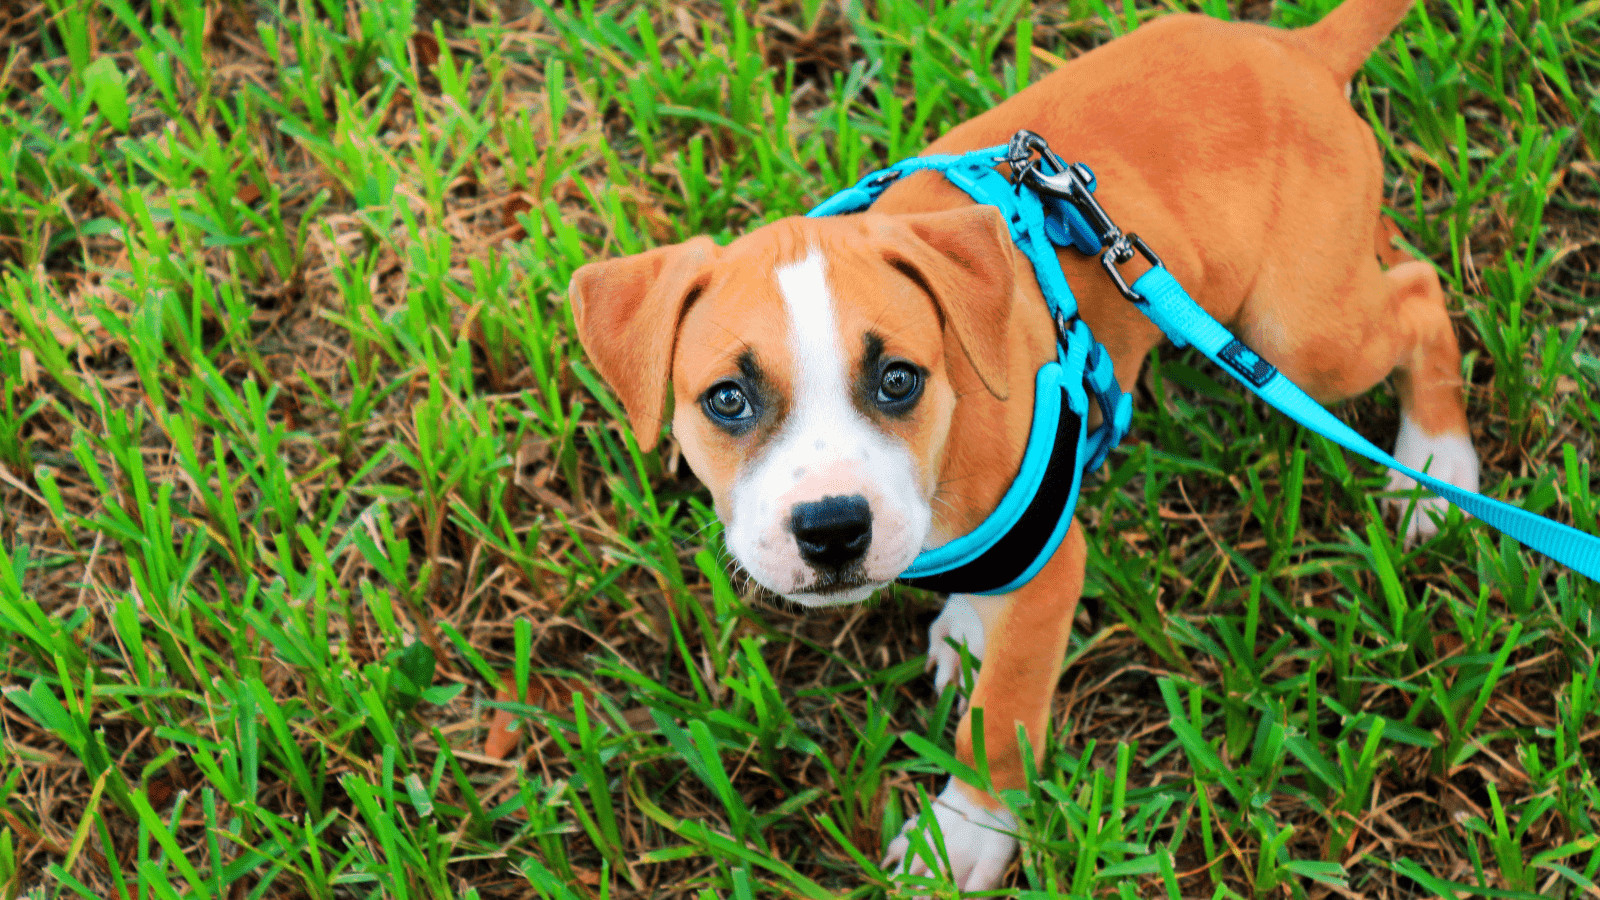 How to train your puppy to wear a harness